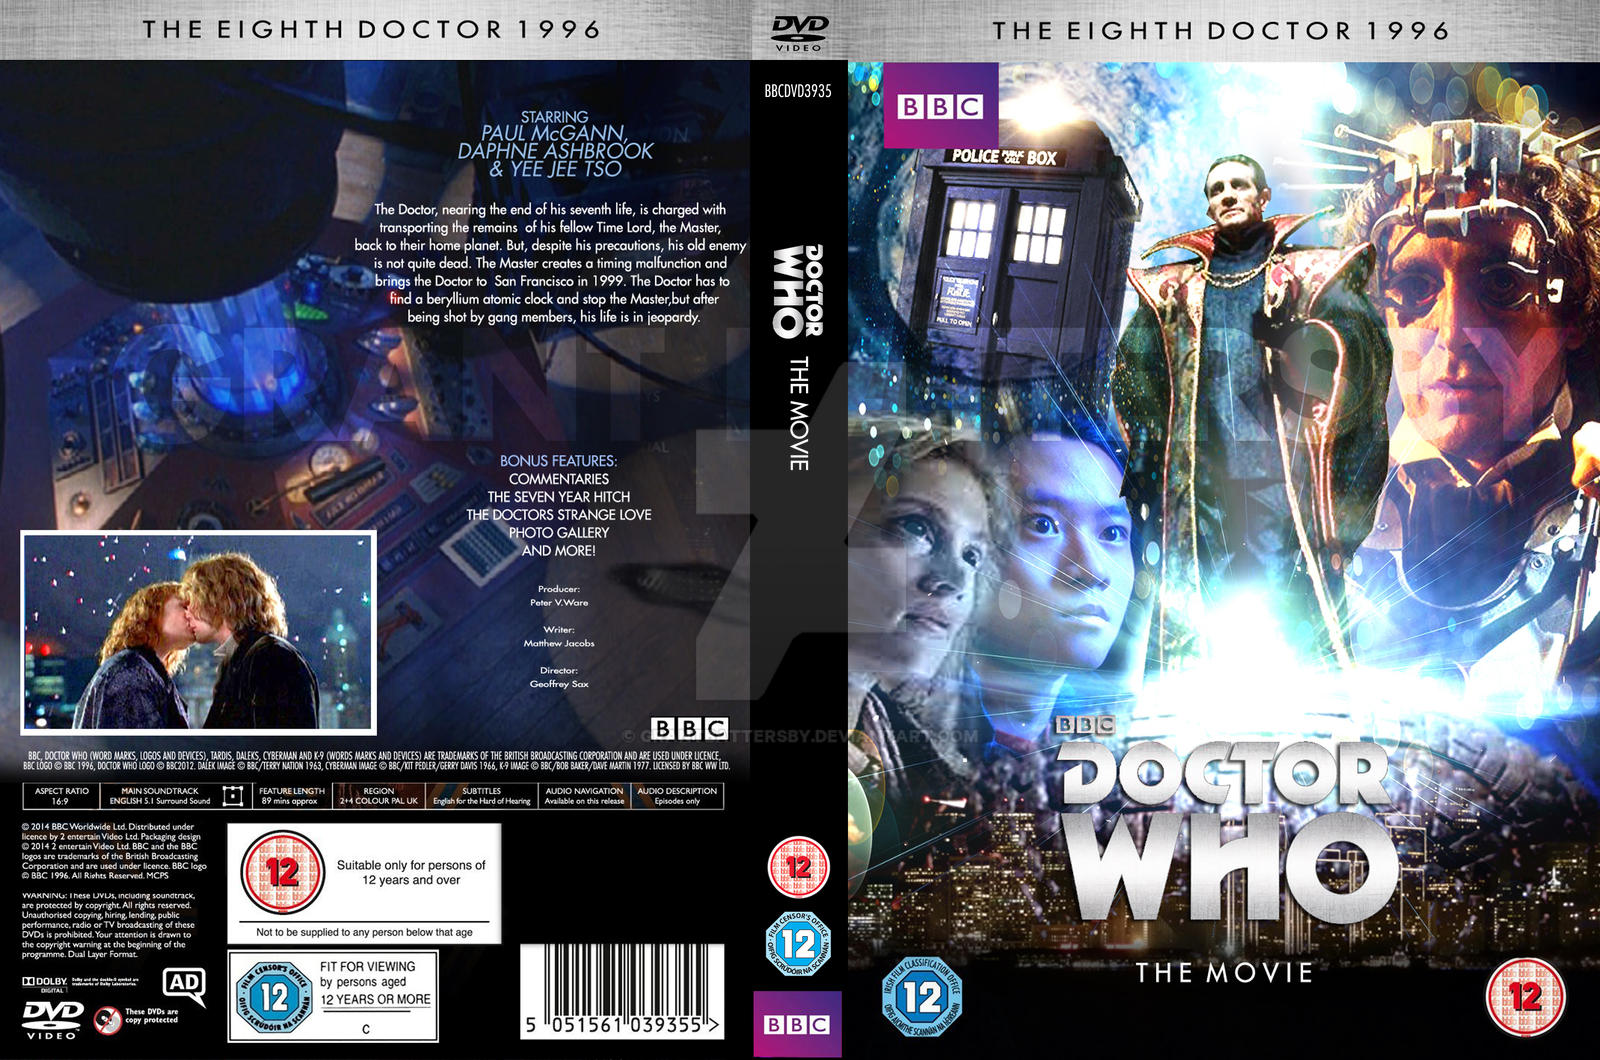 The First Doctor – Custom Doctor Who DVD Covers